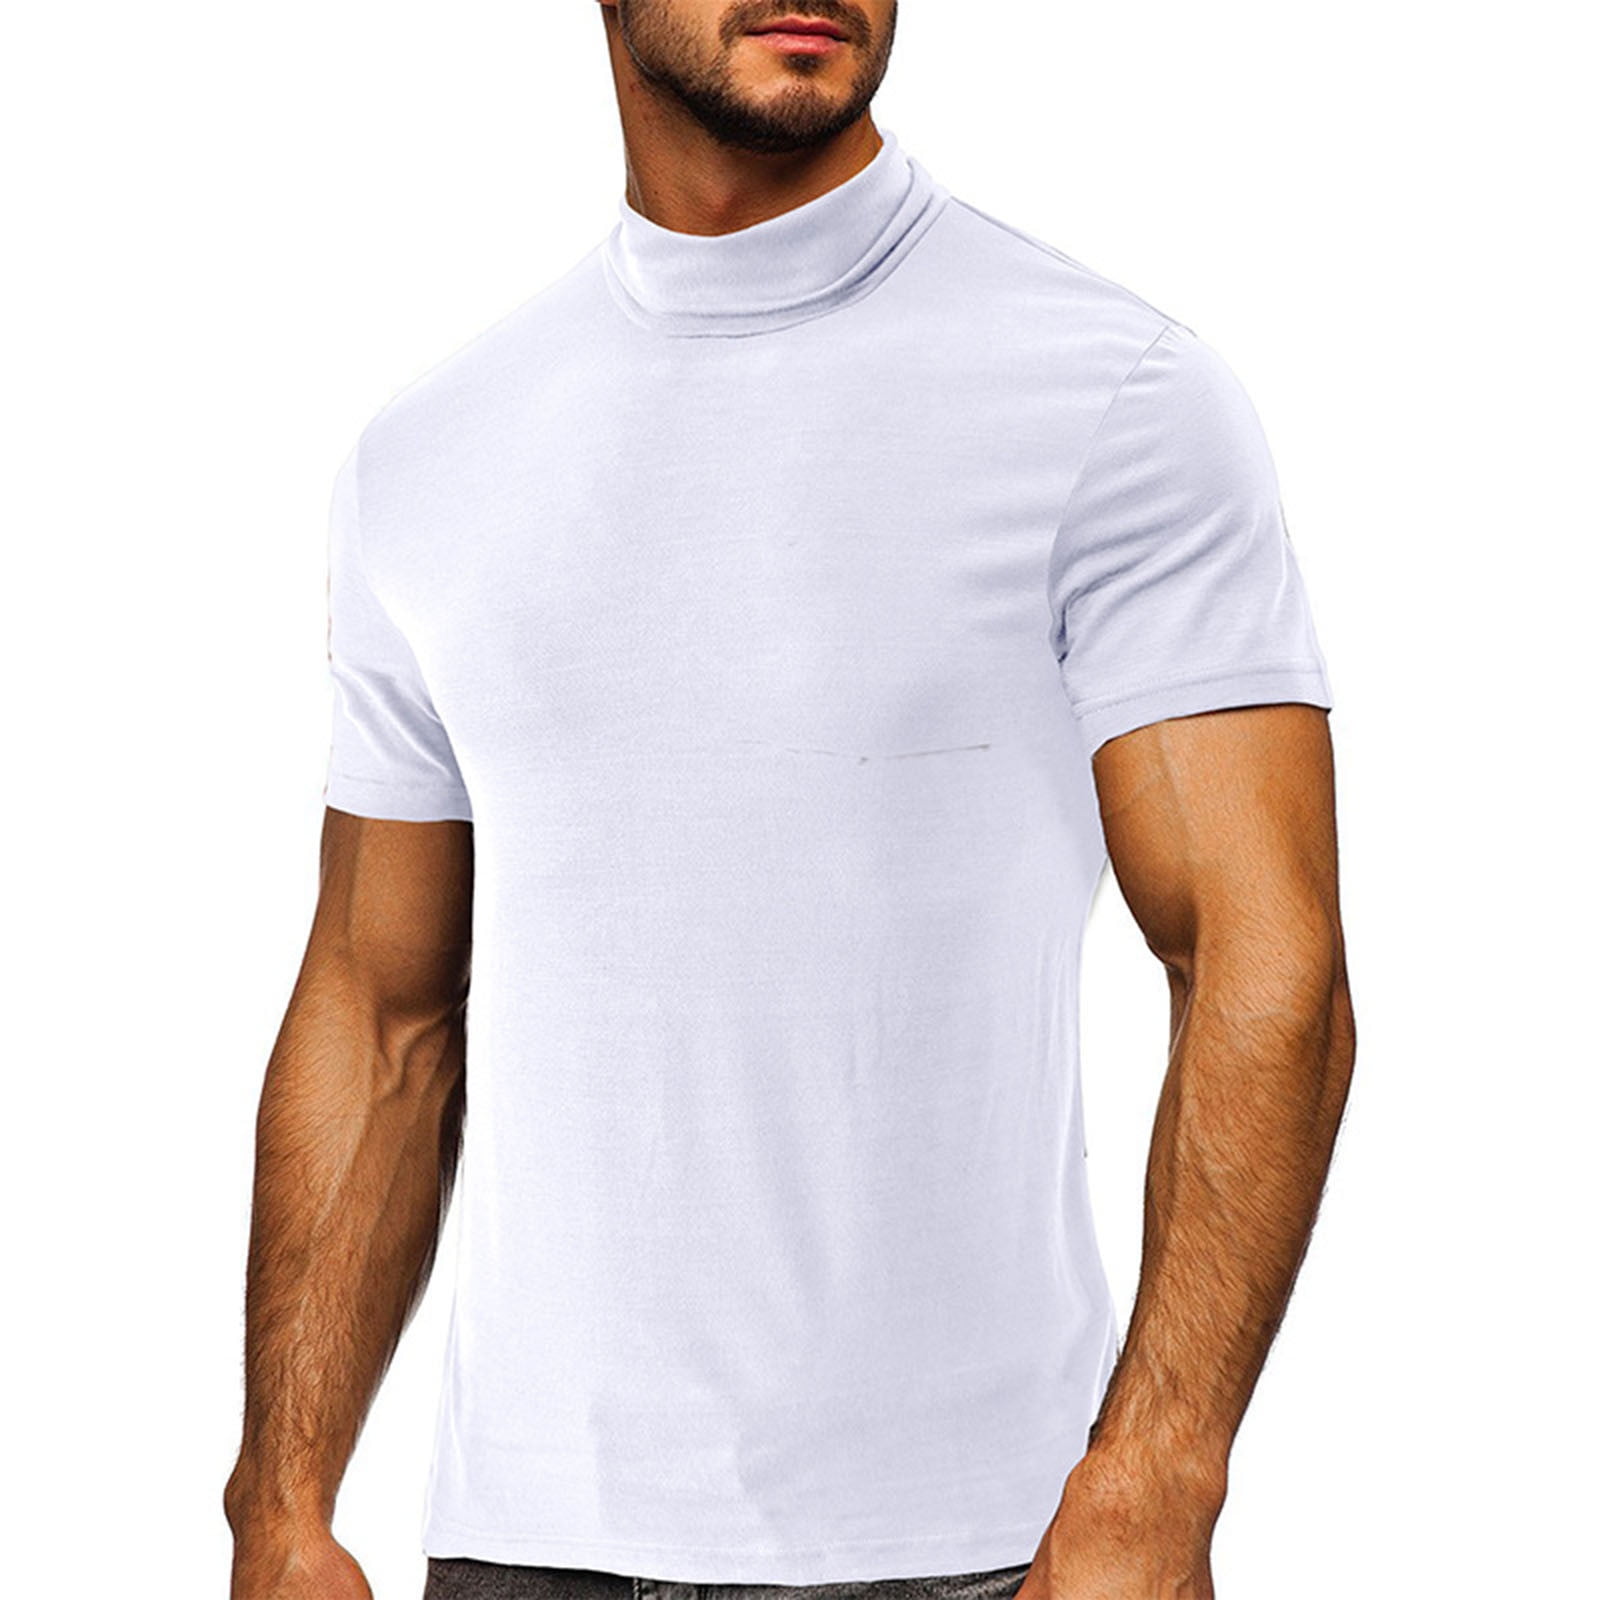 Xihbxyly High Neck T Shirts for Men, Mens T Shirt Slim Fit Tank Top Turtle Neck Shirt Solid Color Short Sleeve Casual Fashion High Collar Base Shirt T Shirt Blouse